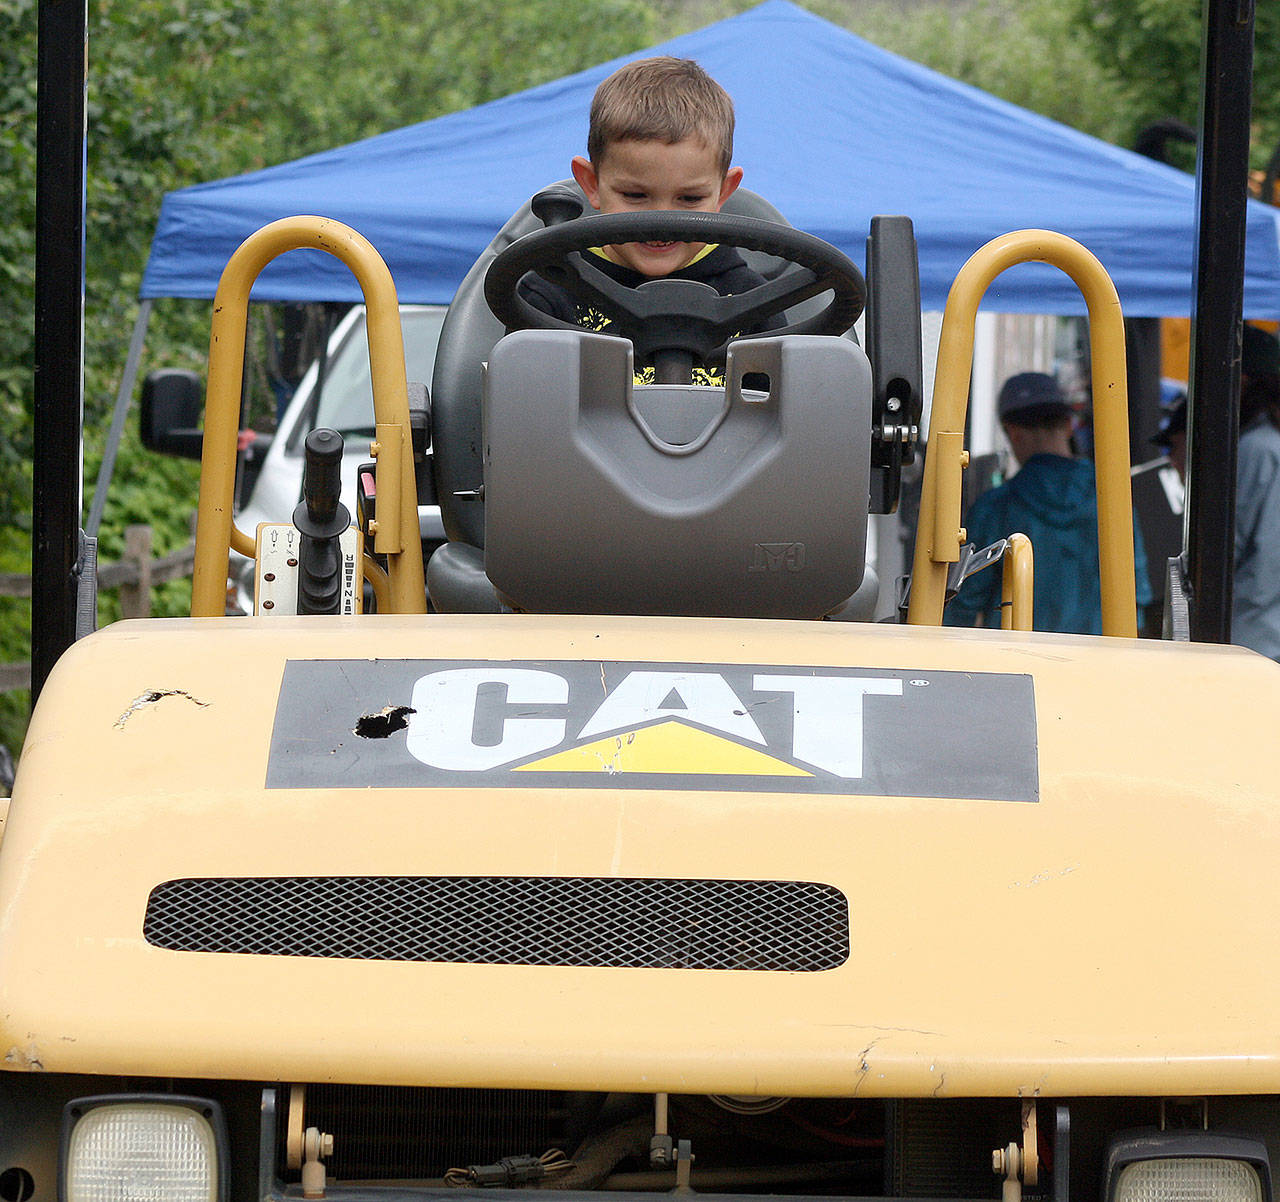 Karston Jenkins, 4, of Milton, takes a seat in an asphalt roller during the annual City of Kent Public Works Department demonstration day at the accesso ShoWare Center on Thursday. Jenkins attended the event with his mother and his grandmother, who lives in Kent. The event gives people a chance to see what Public Works employees do for the city. STEVE HUNTER, Kent Reporter